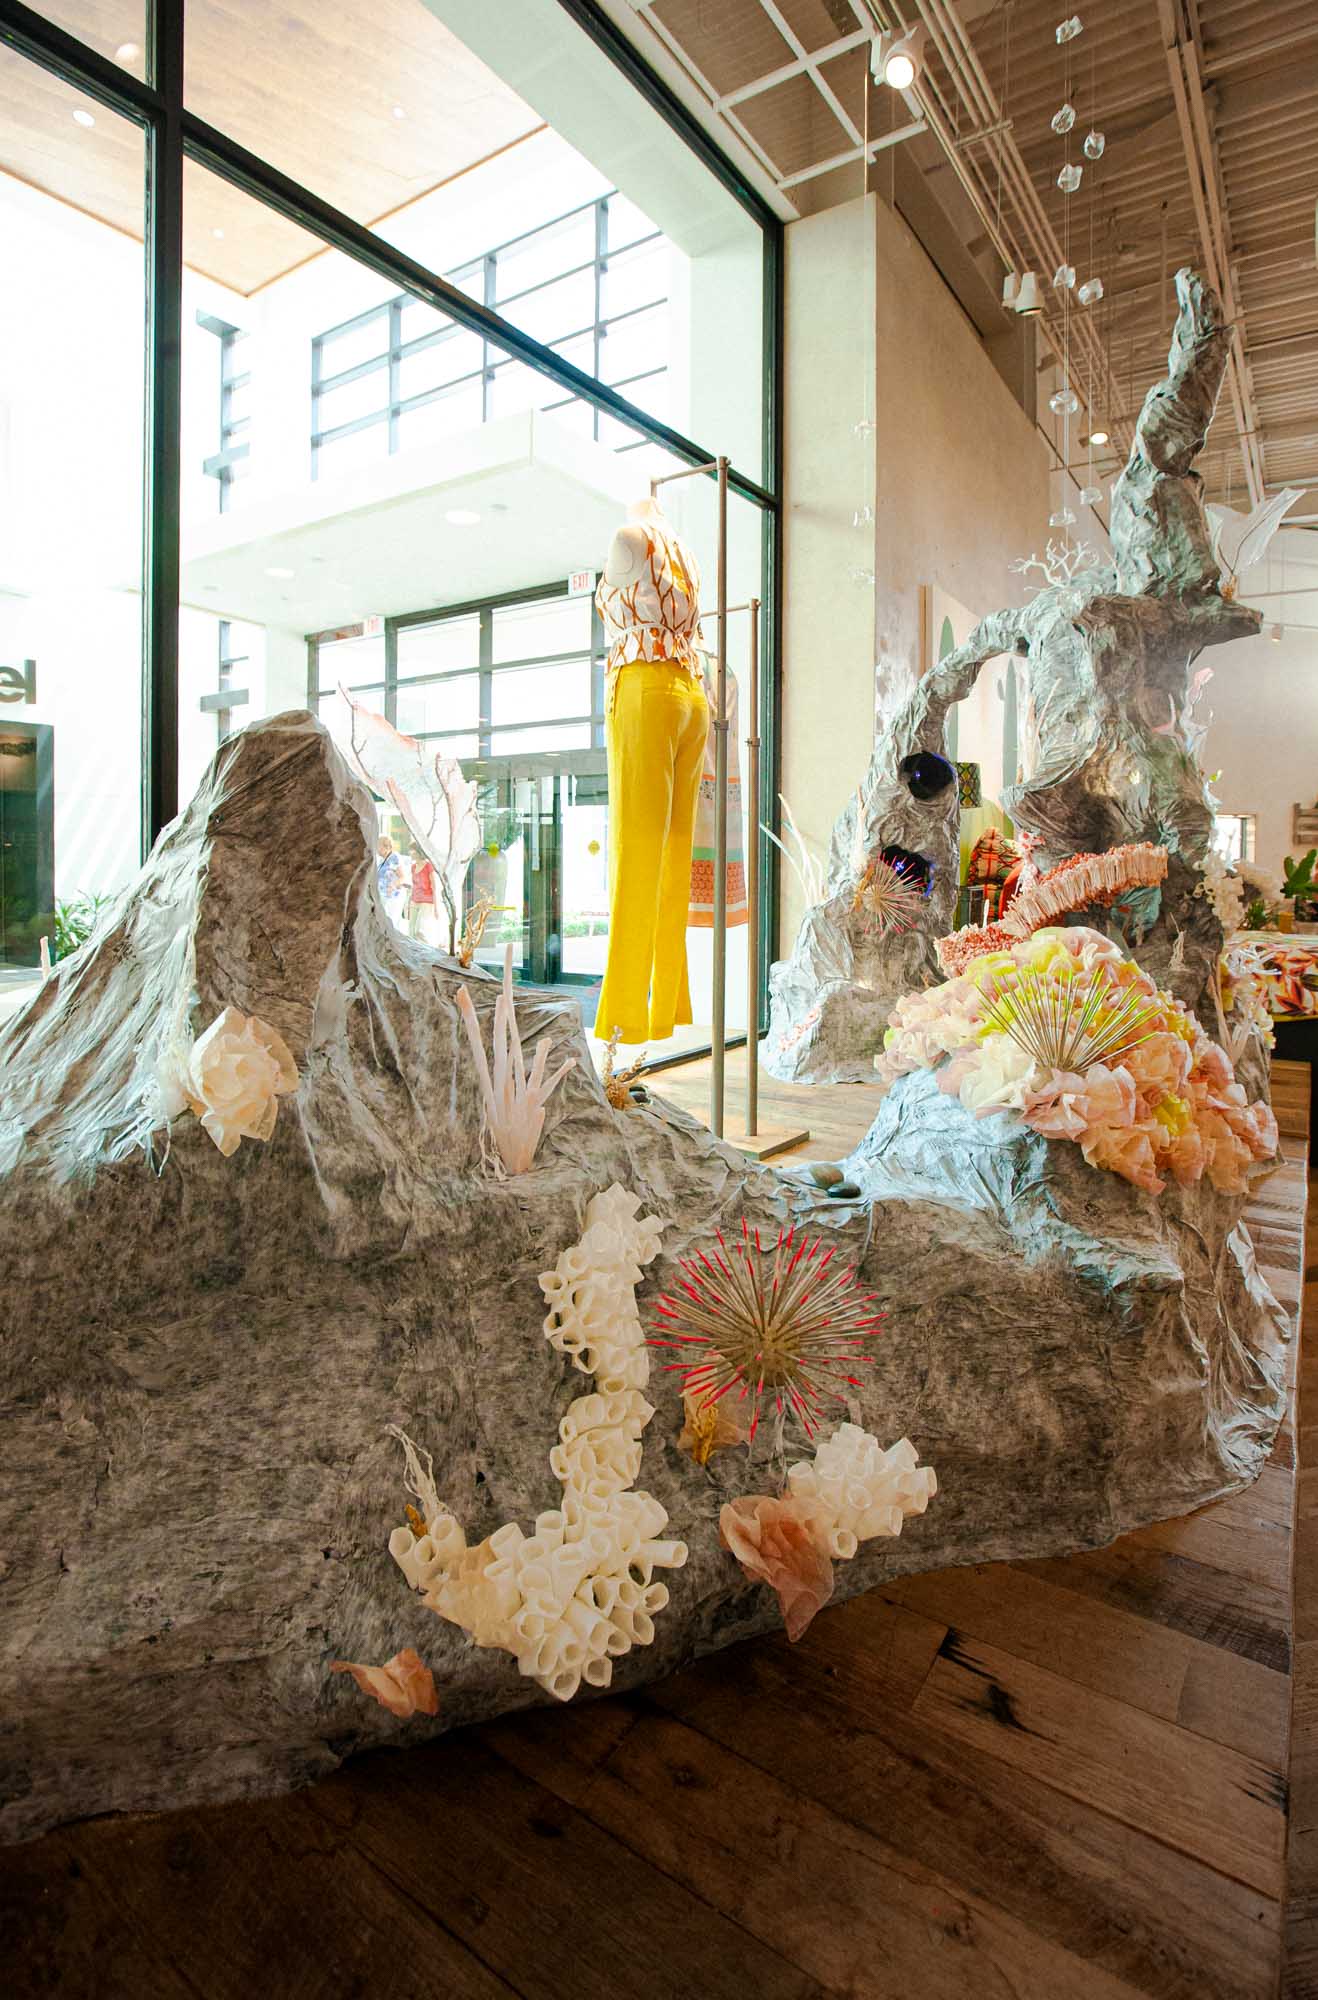 Earth Day Coral Reef Window Display at Anthropologie